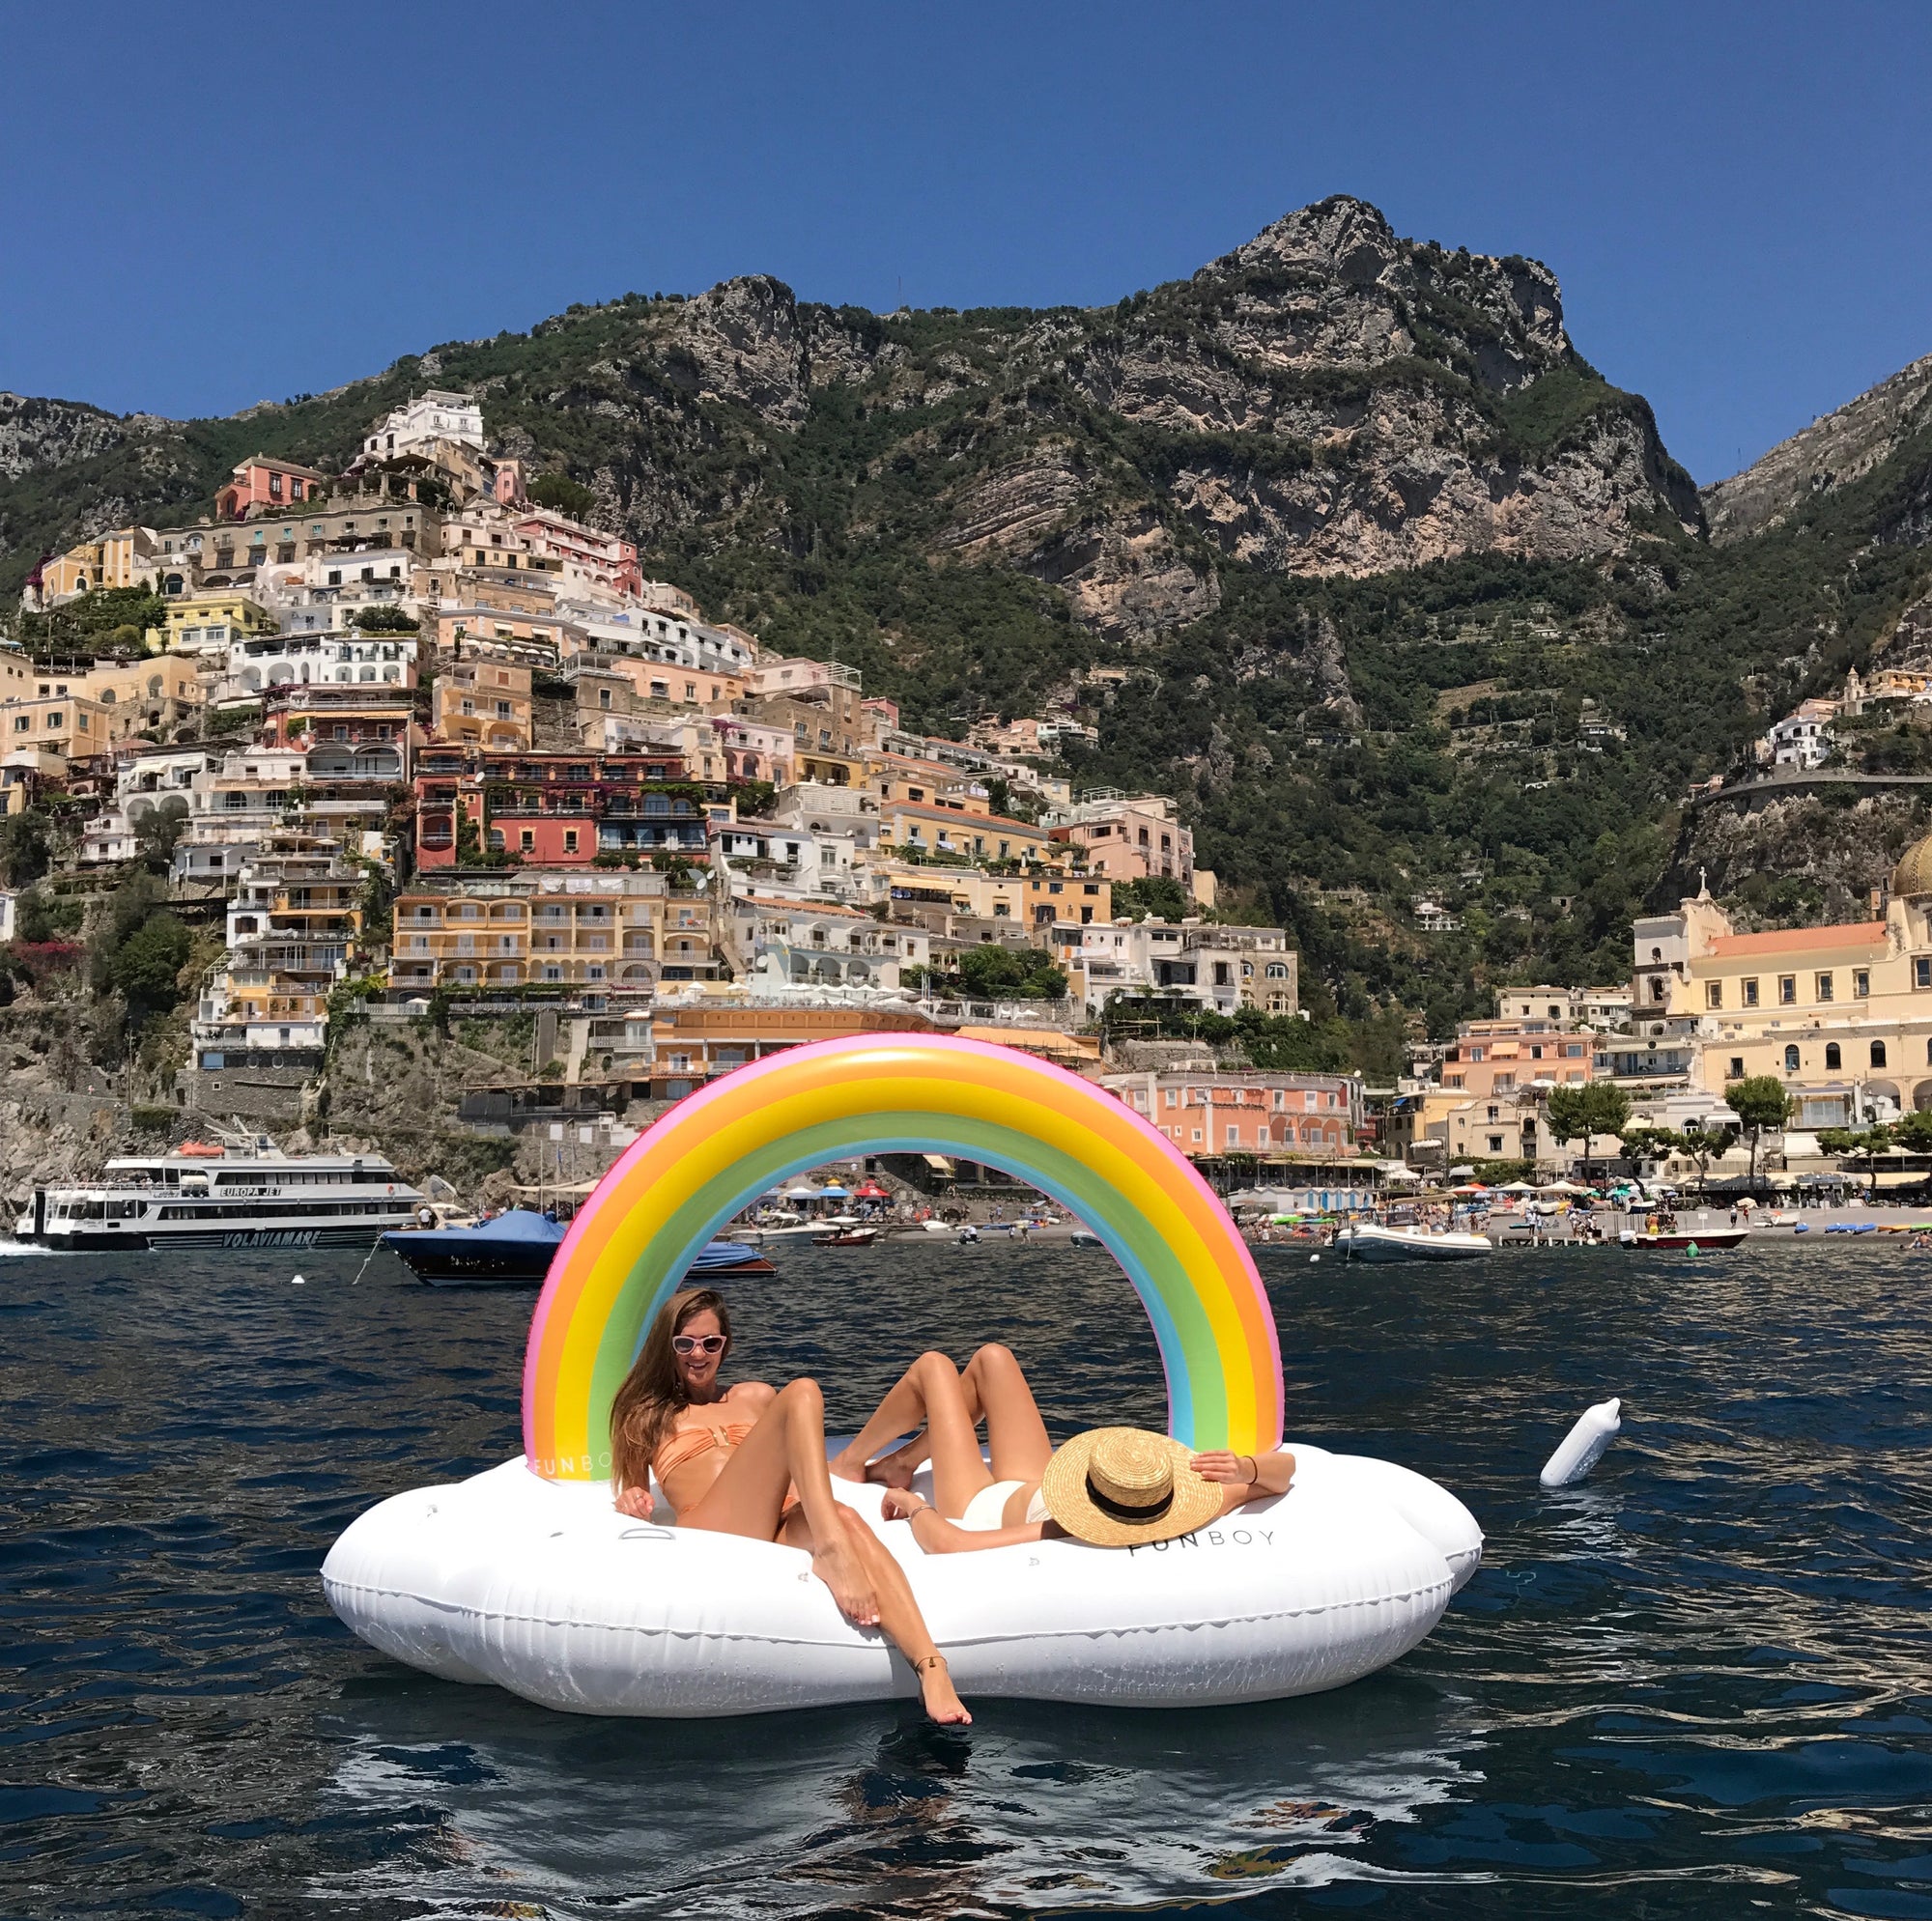 FUNBOY x Europe: Posted in Positano